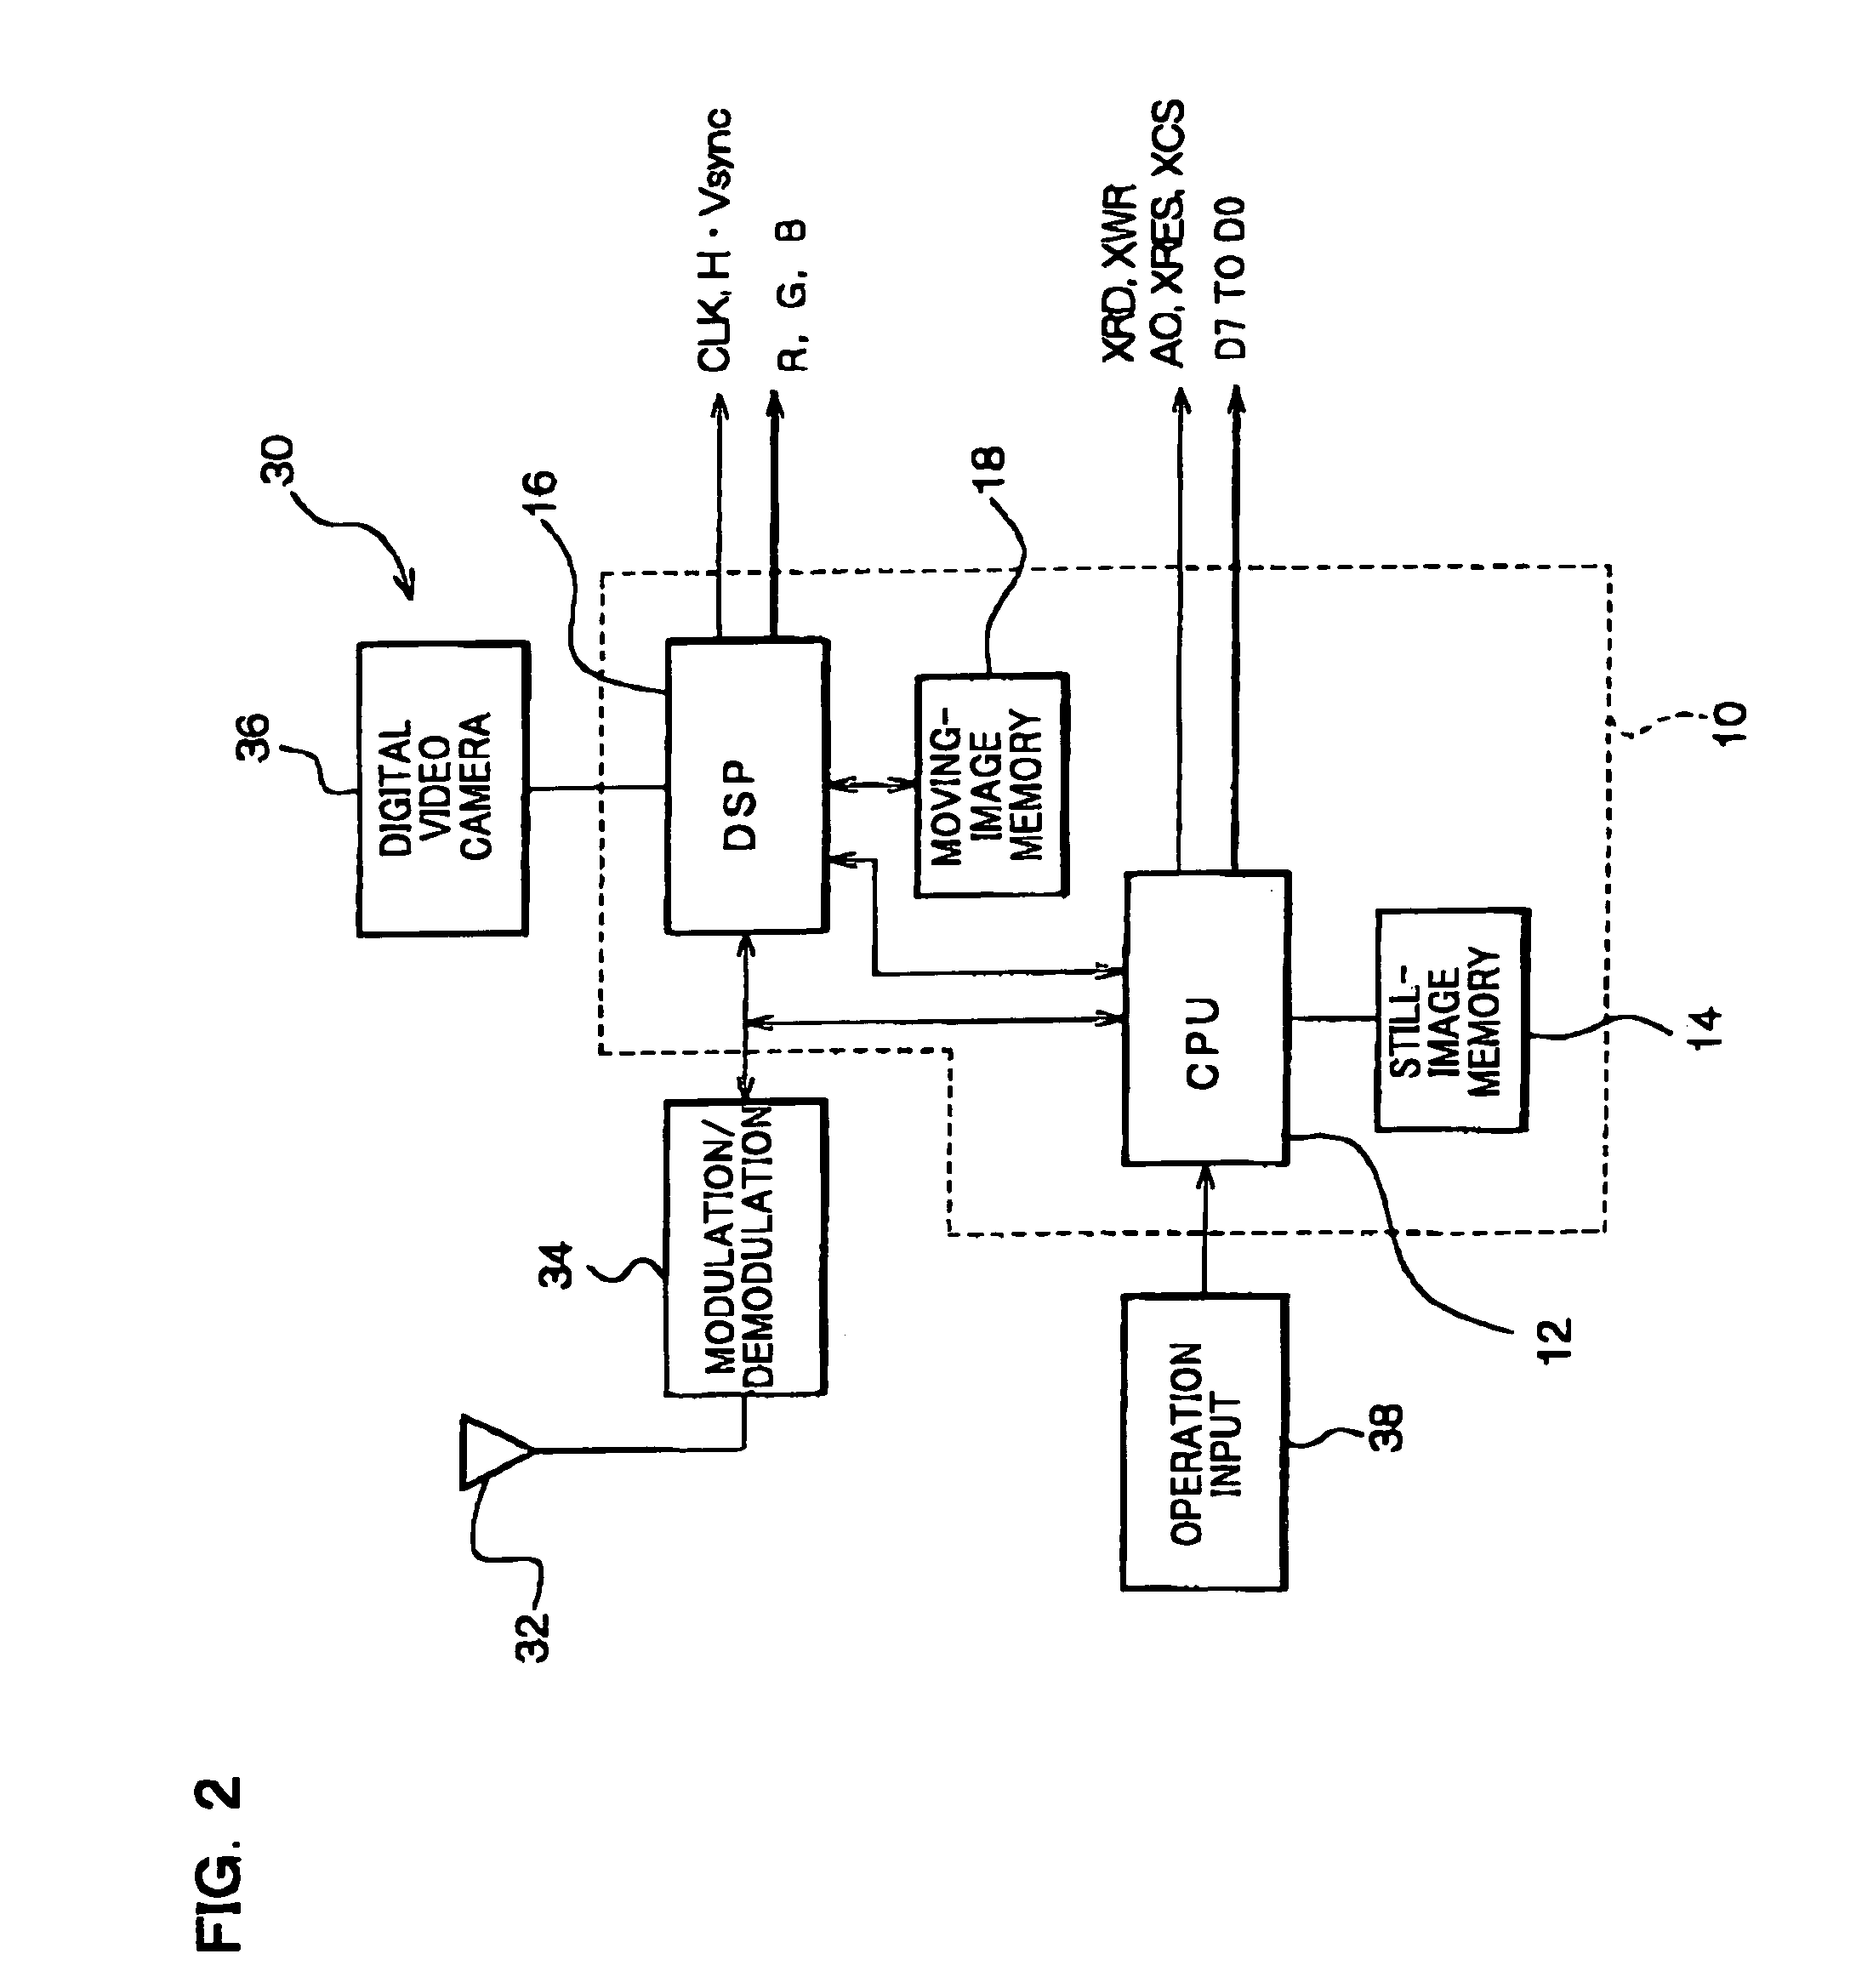 Ram-incorporated driver, and display unit and electronic equipment using the same